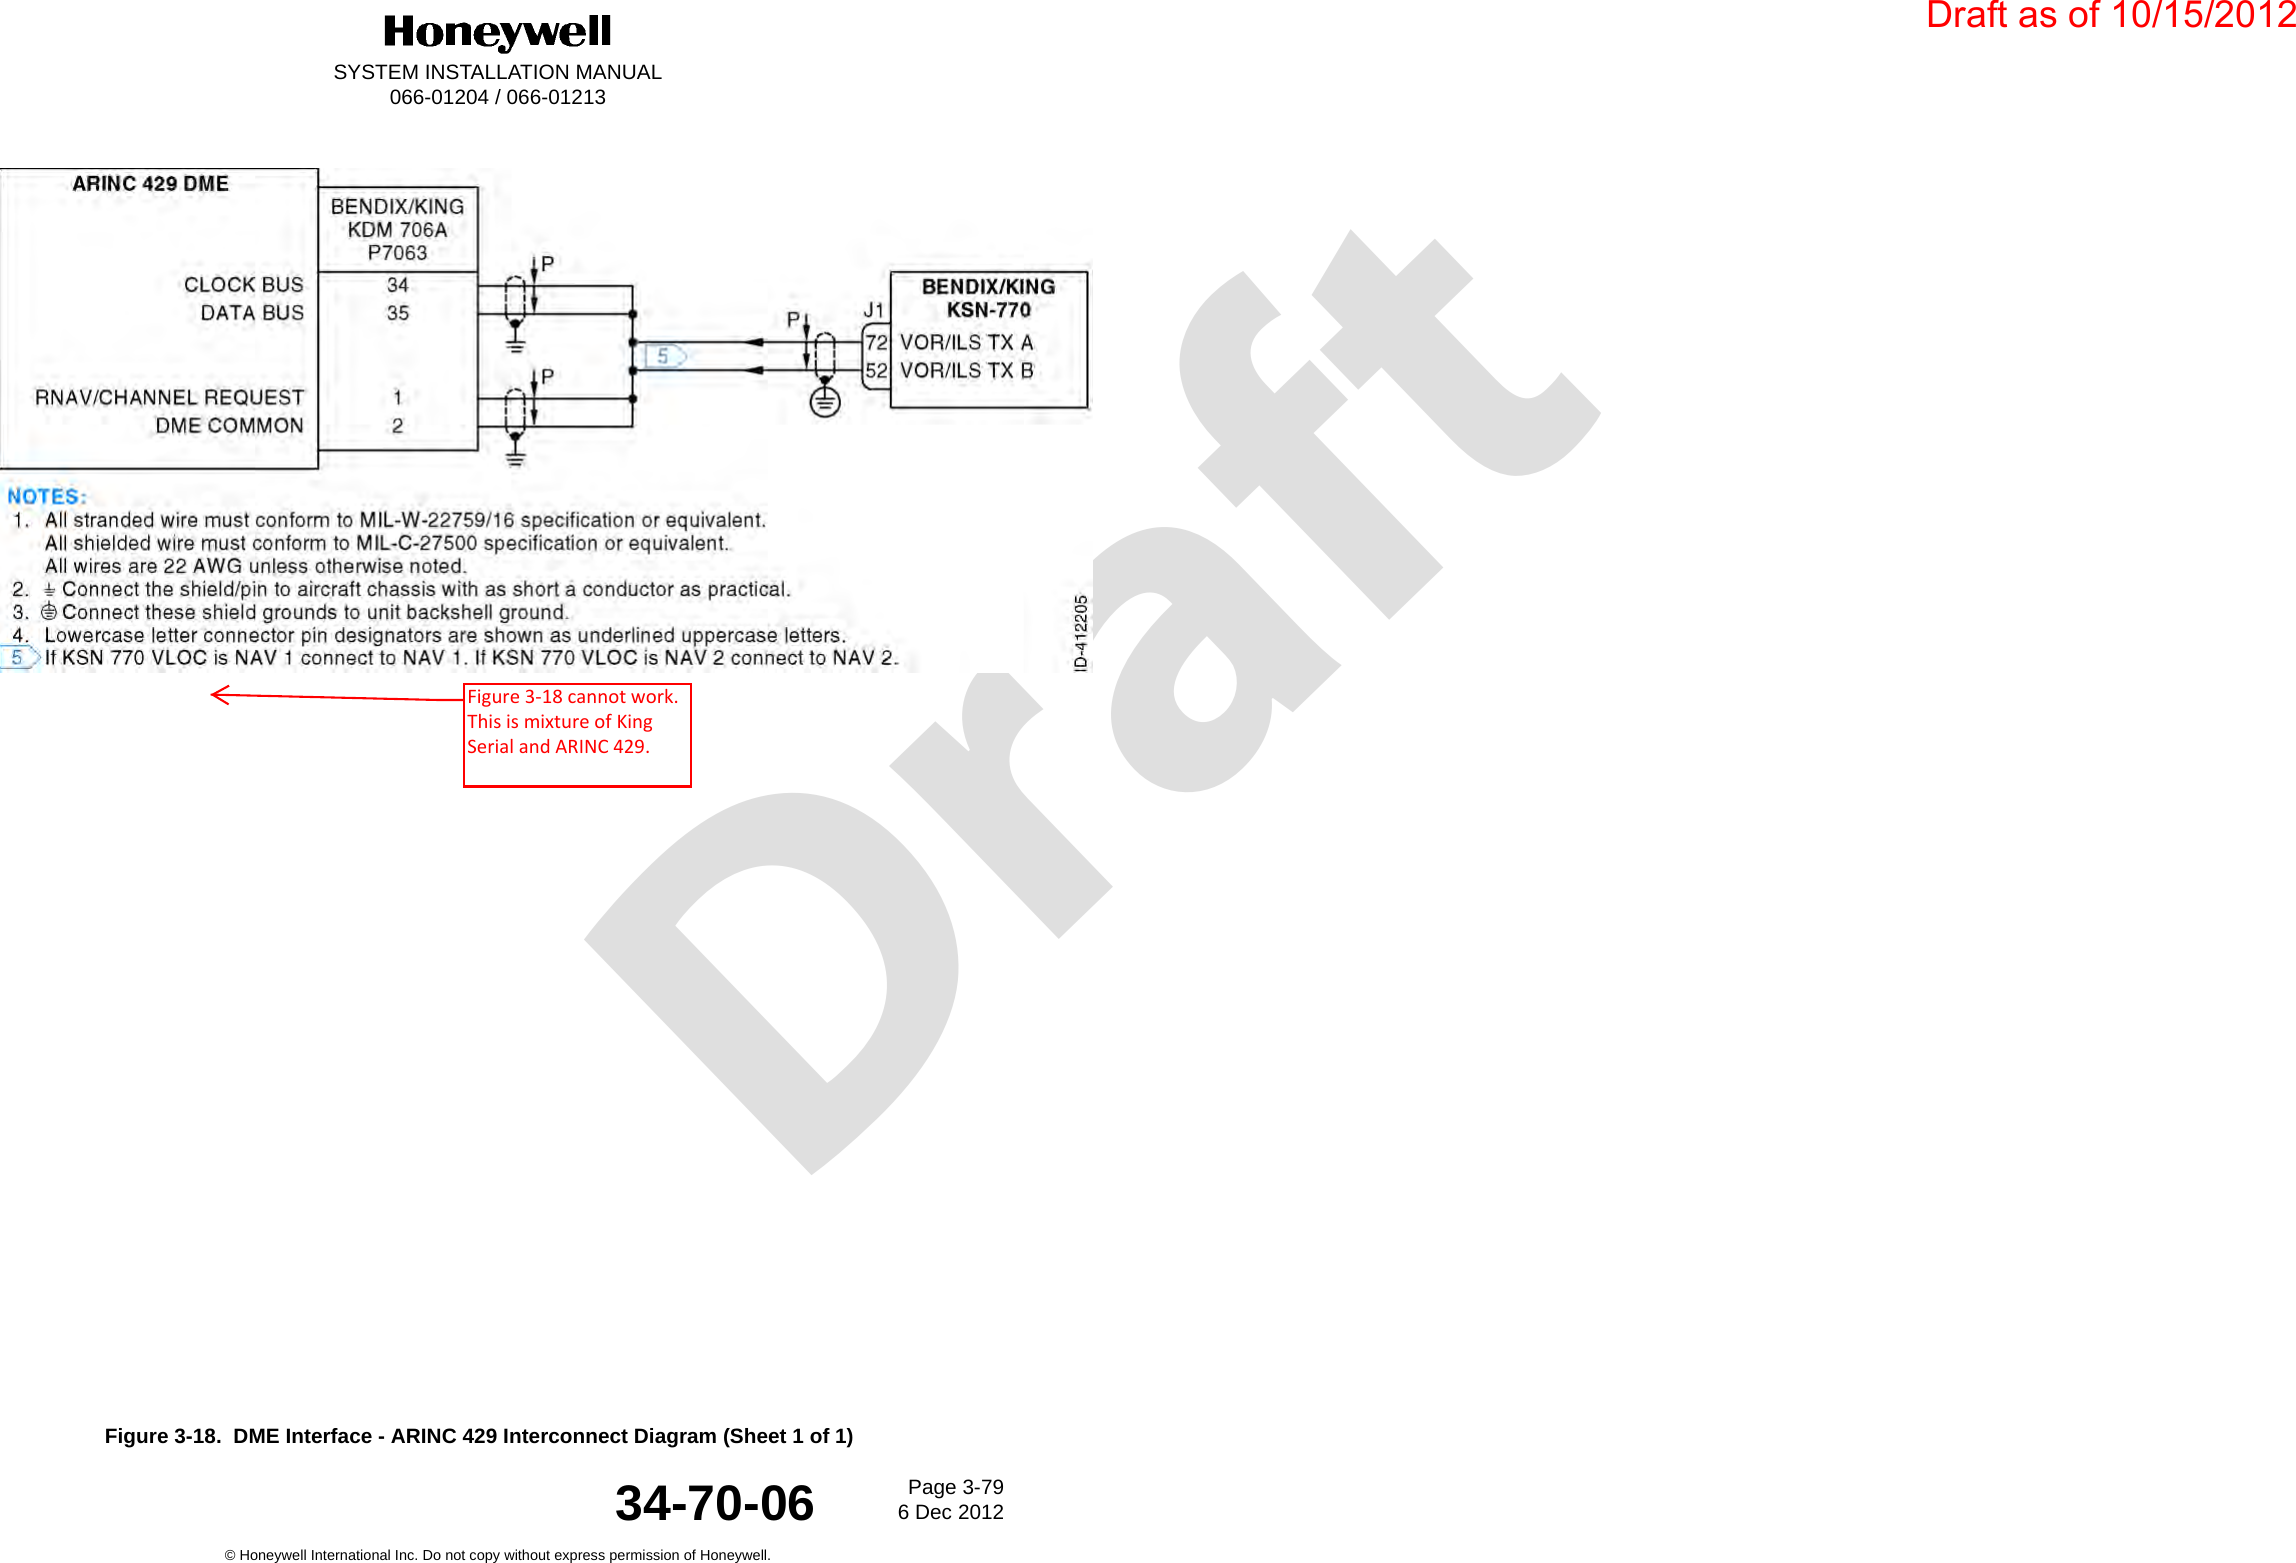 DraftSYSTEM INSTALLATION MANUAL066-01204 / 066-01213Page 3-796 Dec 2012© Honeywell International Inc. Do not copy without express permission of Honeywell.34-70-06Figure 3-18.  DME Interface - ARINC 429 Interconnect Diagram (Sheet 1 of 1)Draft as of 10/15/2012Figure 3-18 cannot work.  This is mixture of King Serial and ARINC 429. 